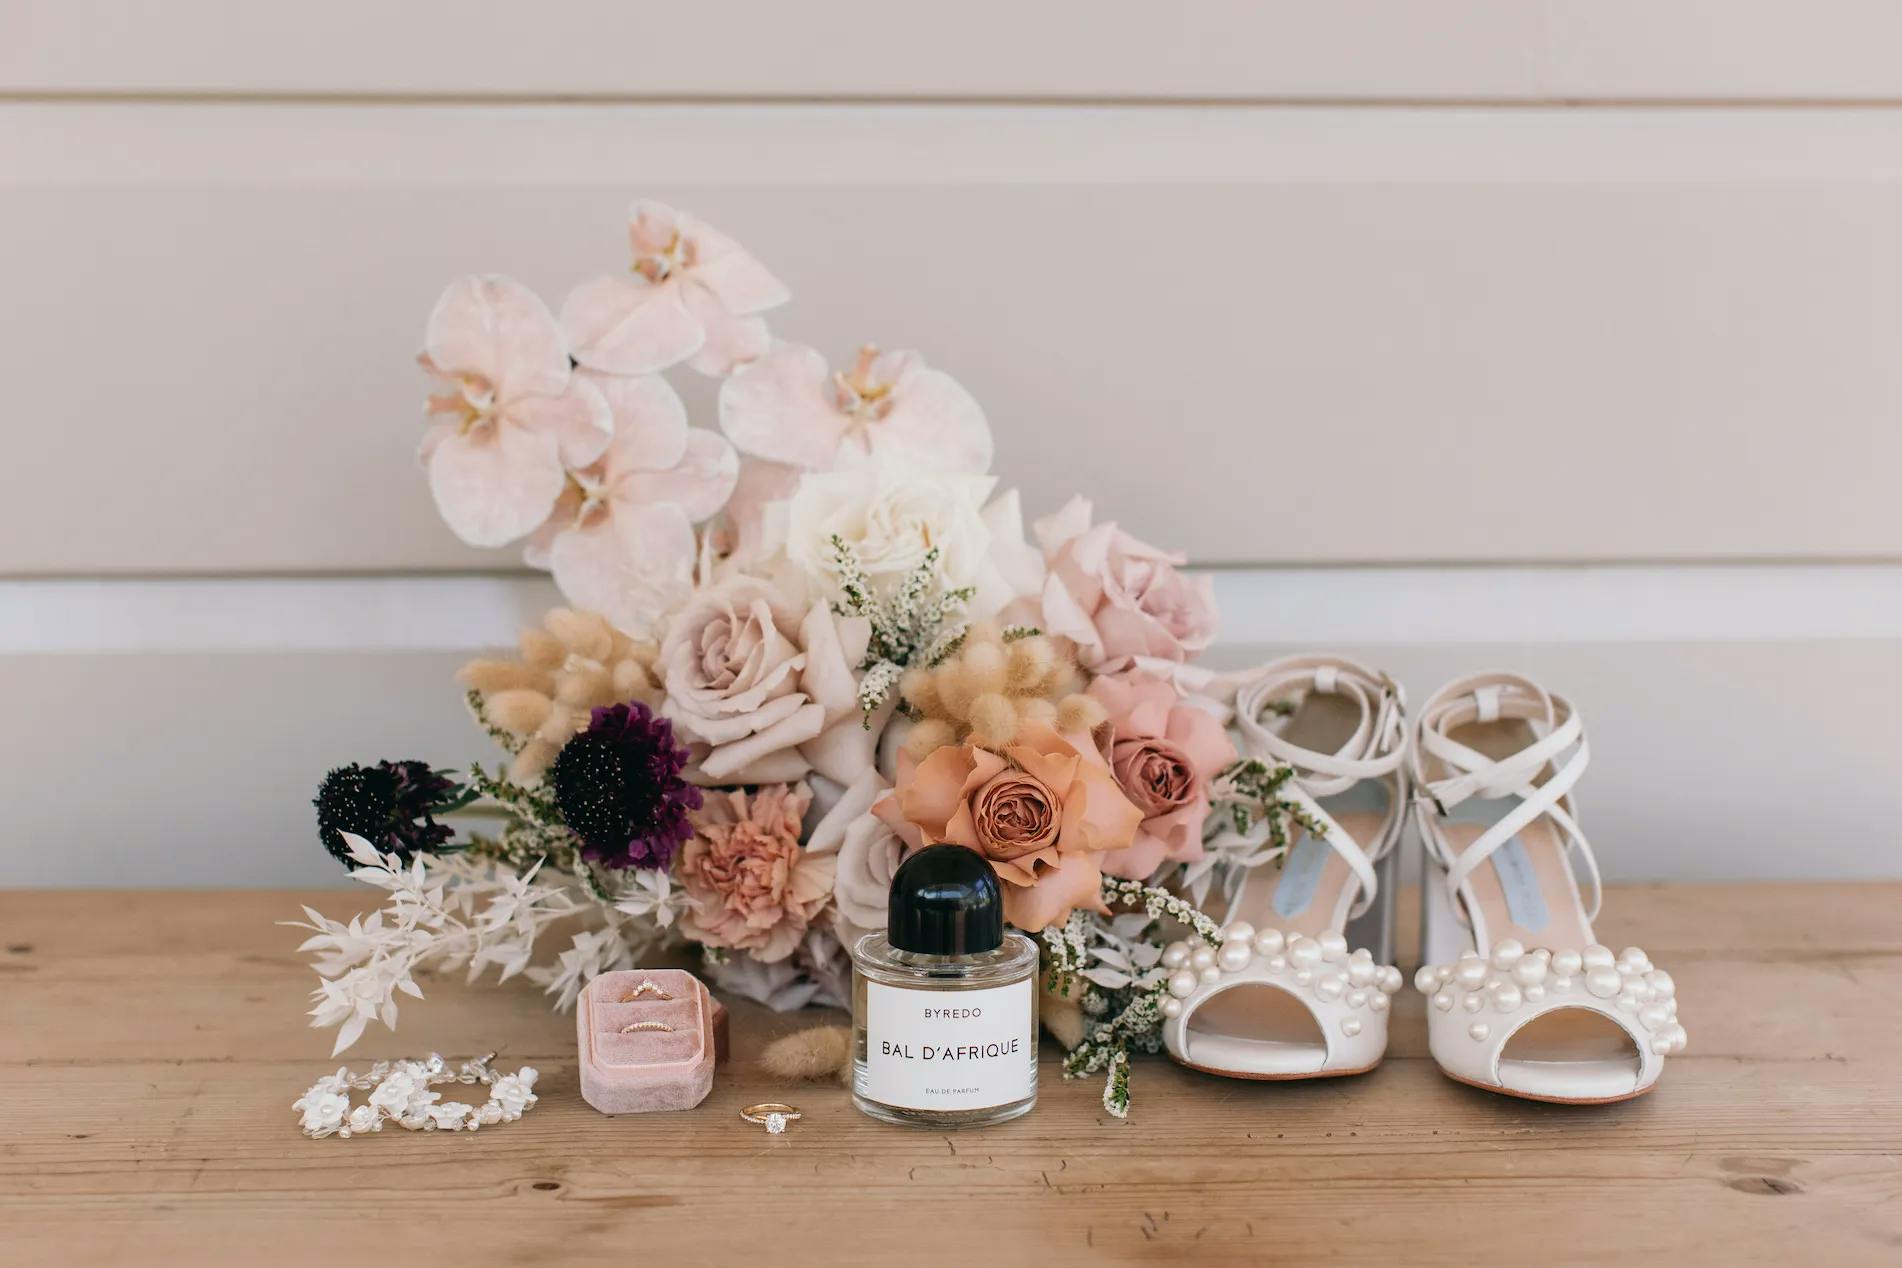 A wedding arrangement featuring pink and white flowers, a pair of white high-heeled shoes adorned with pearls, a bottle of perfume labeled "Bal d'Afrique," a pink velvet ring box with a ring inside, a pair of earrings, and a hairpin, all placed on a wooden surface.